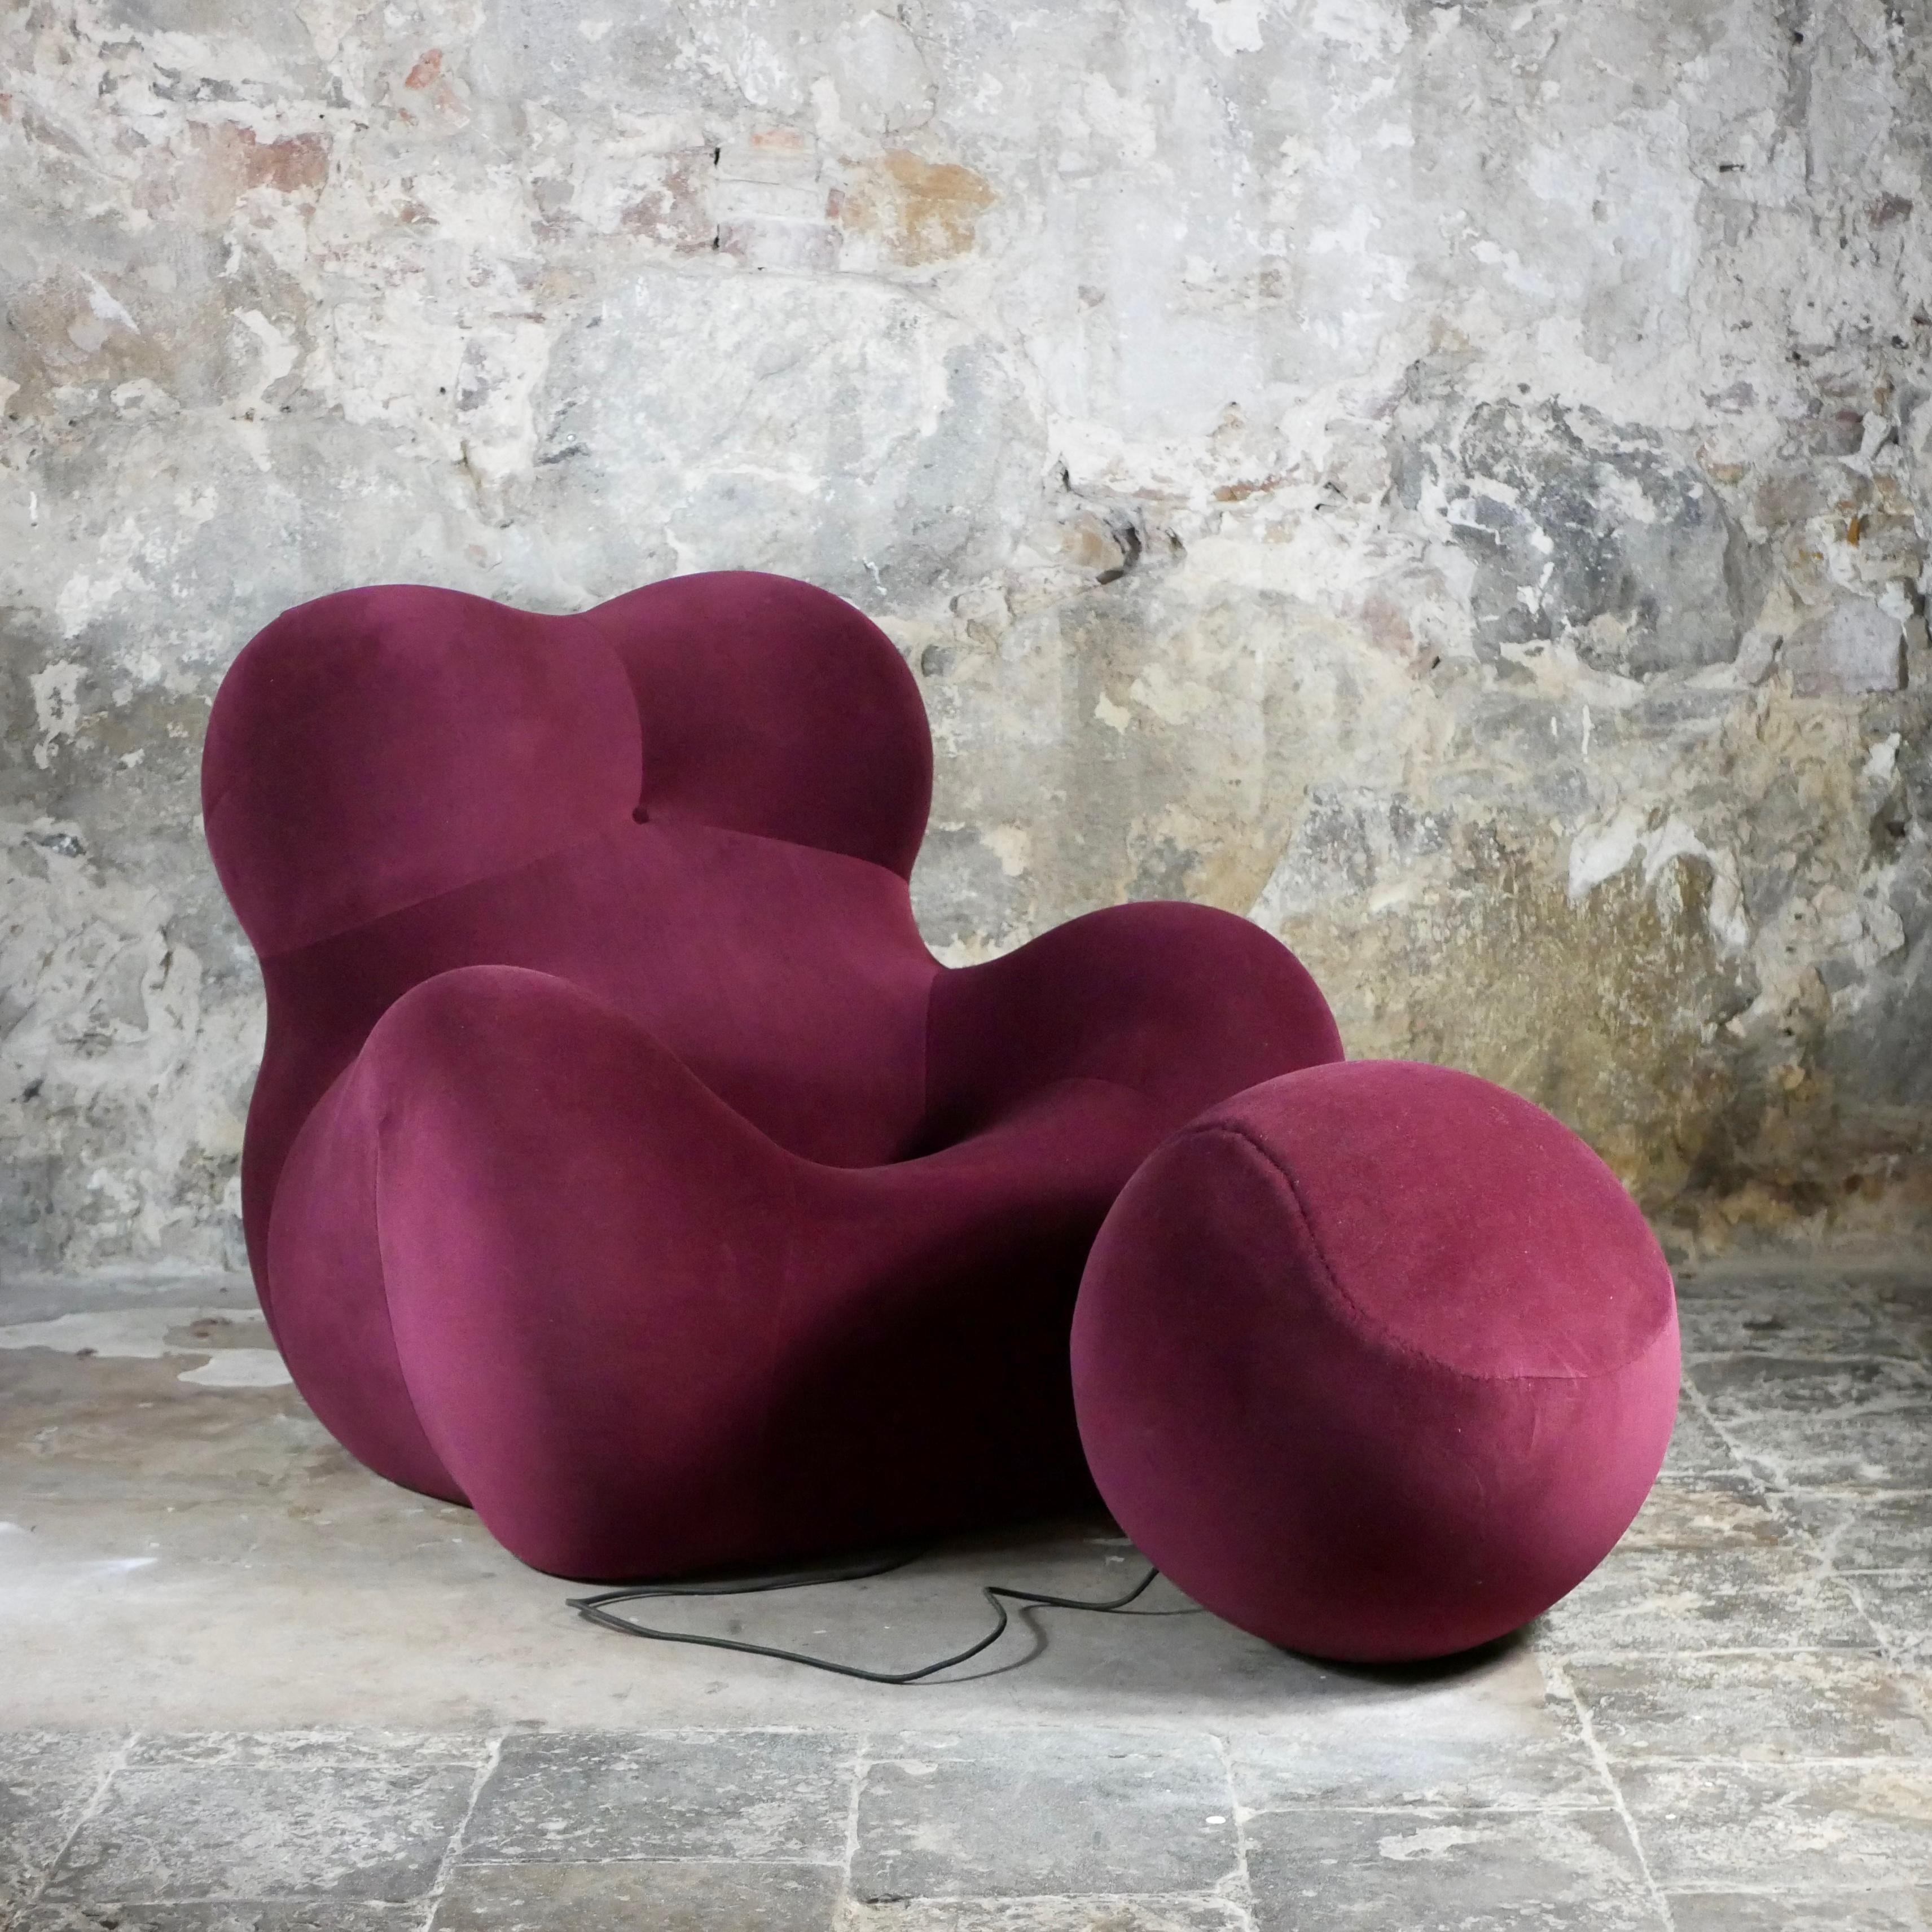 Stunning La Mamma set, 2000 series, made of the UP5 lounge chair and its UP6 ottoman.
An iconic design created by Gaetano Pesce in 1969,  controversial because of the light it spotted on the feminine condition back then : a woman chained to a